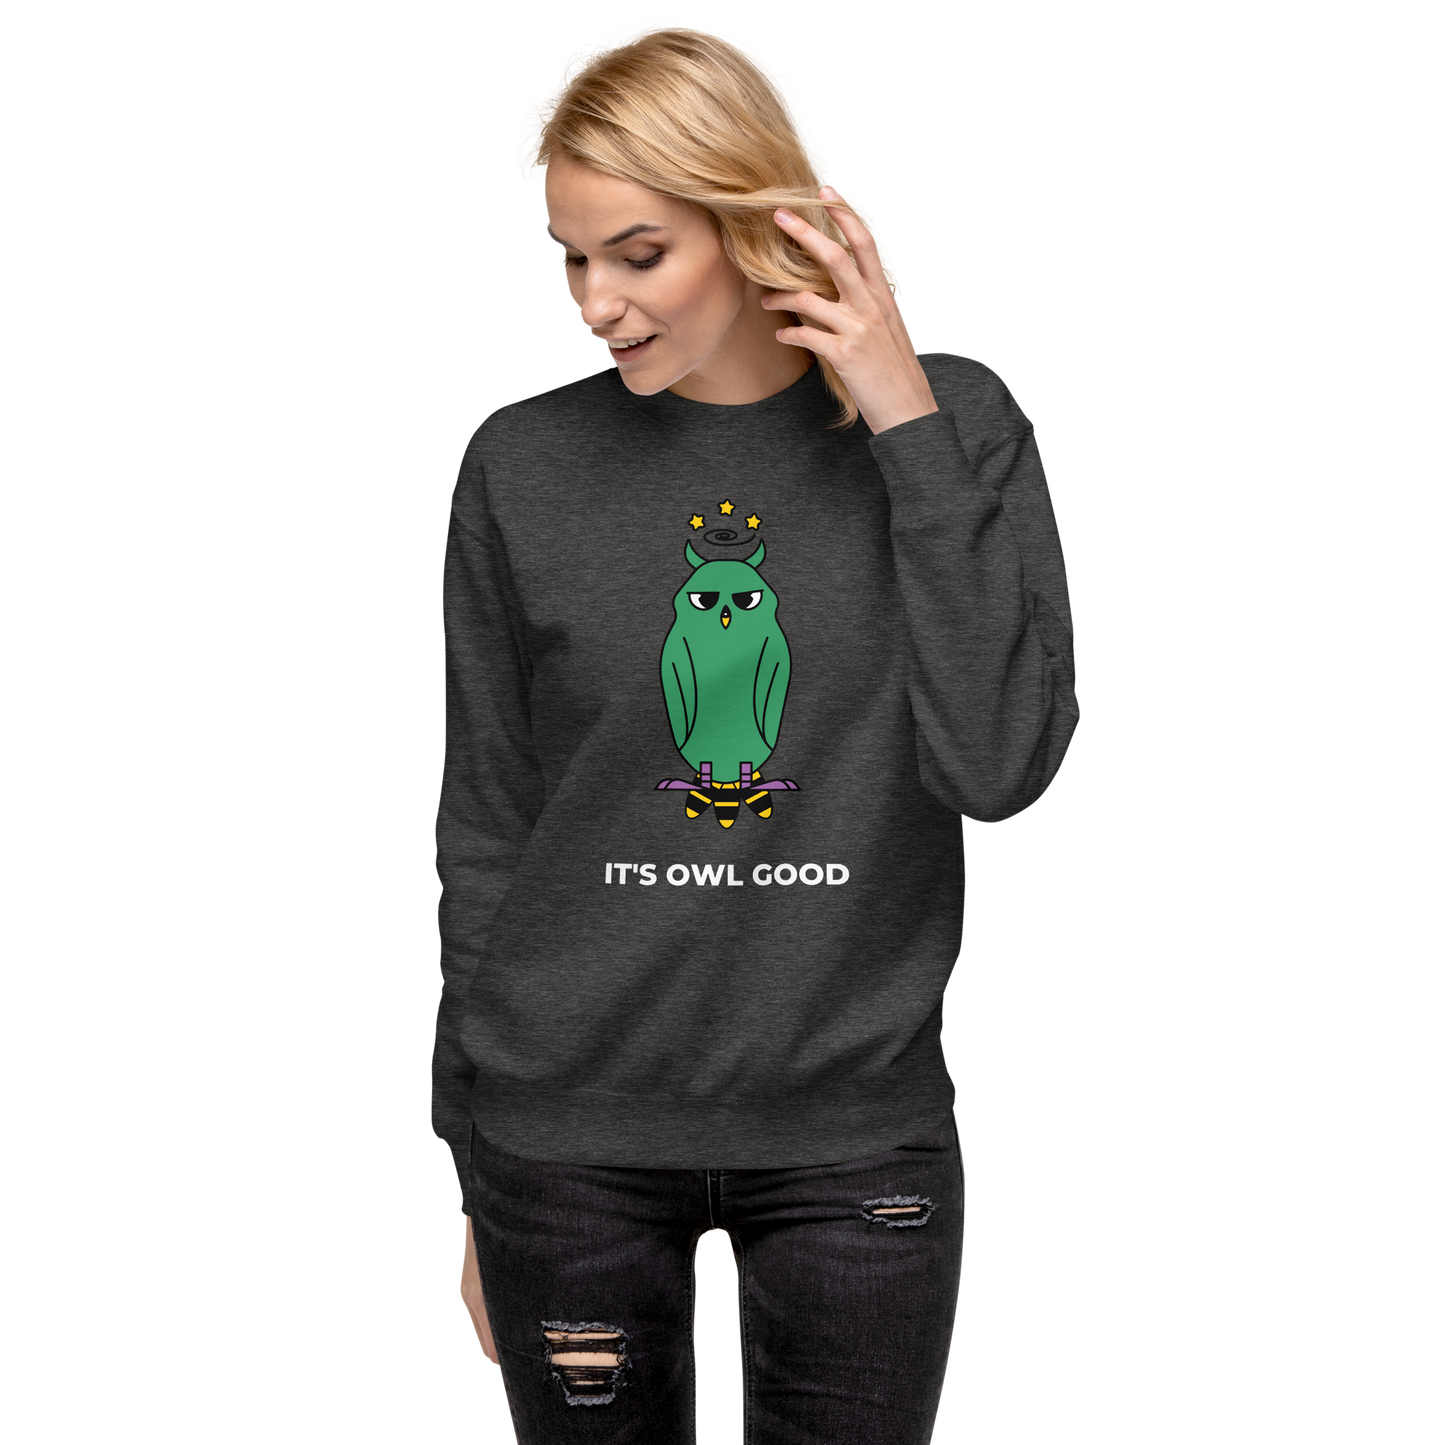 Woman Wearing a Charcoal Heather Premium Owl Sweatshirt featuring a hootin' cool It's Owl Good graphic on the chest - Funny Graphic Owl Sweatshirts - Boozy Fox